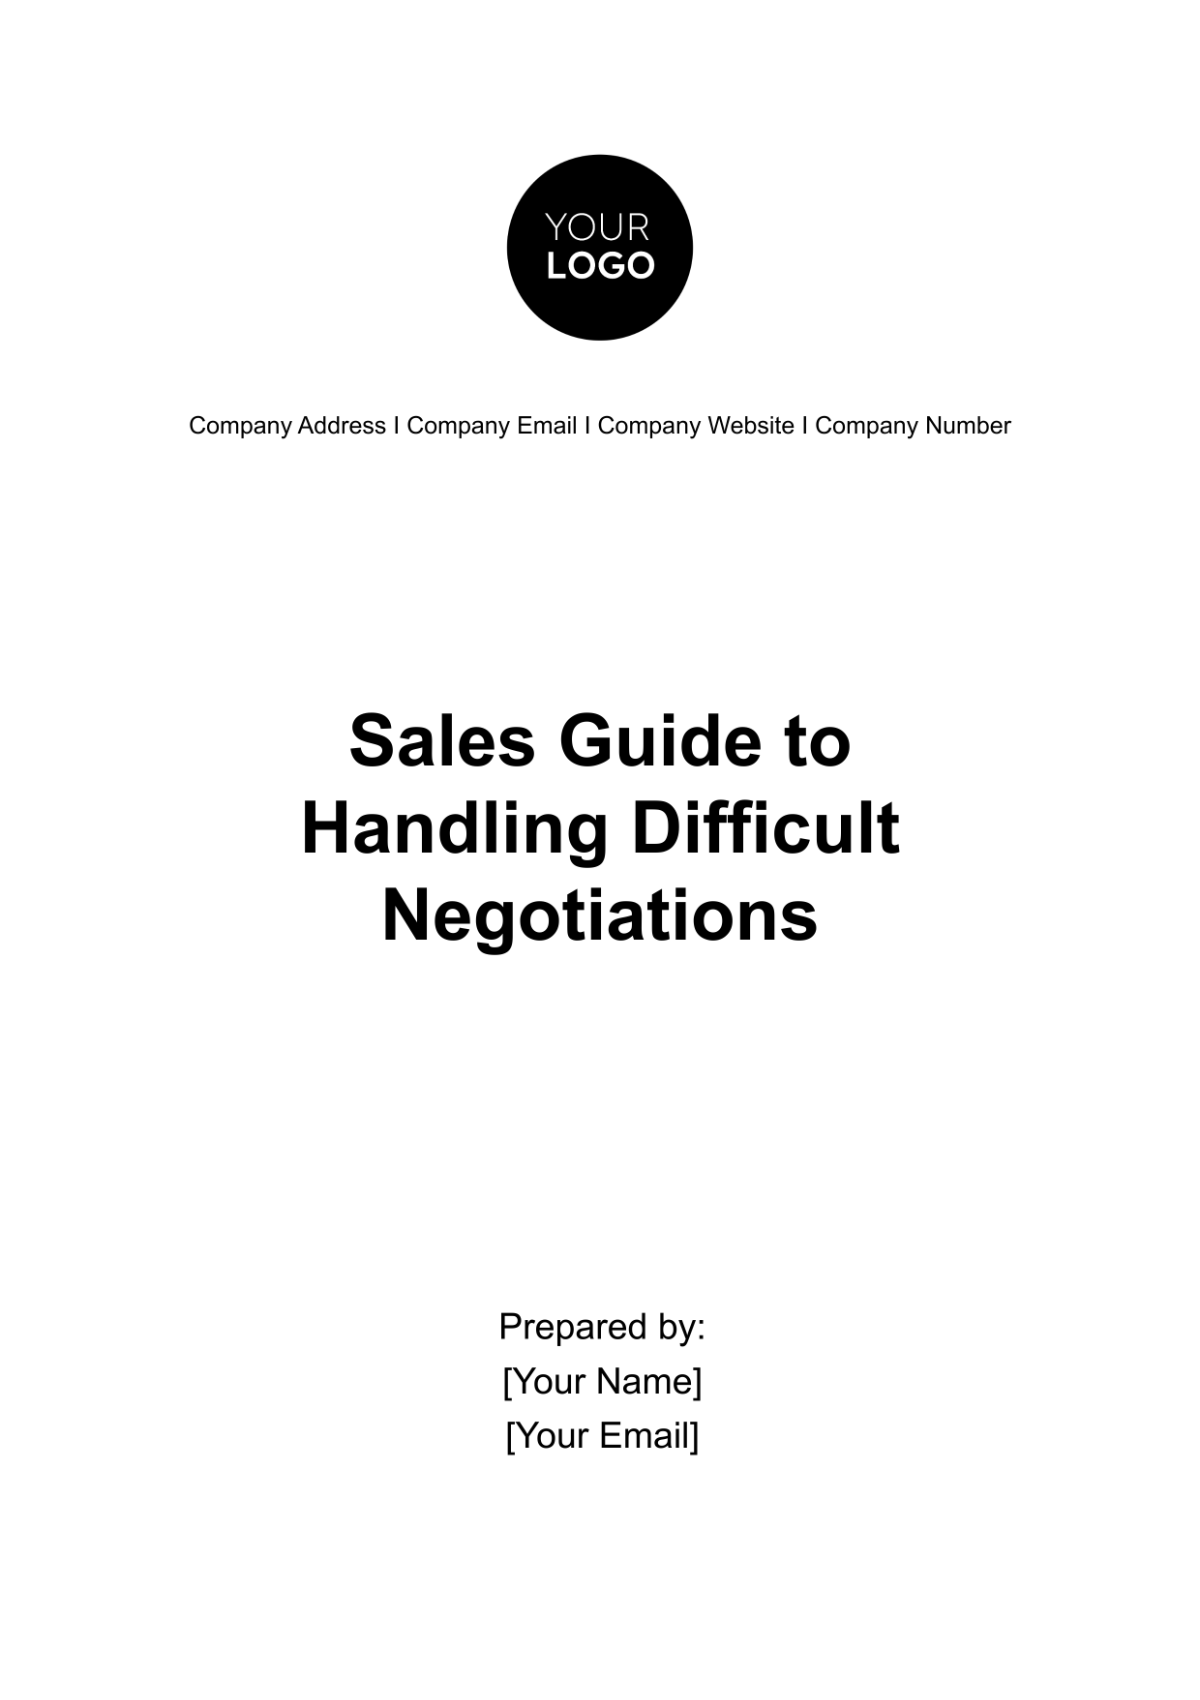 Free Sales Guide to Handling Difficult Negotiations Template